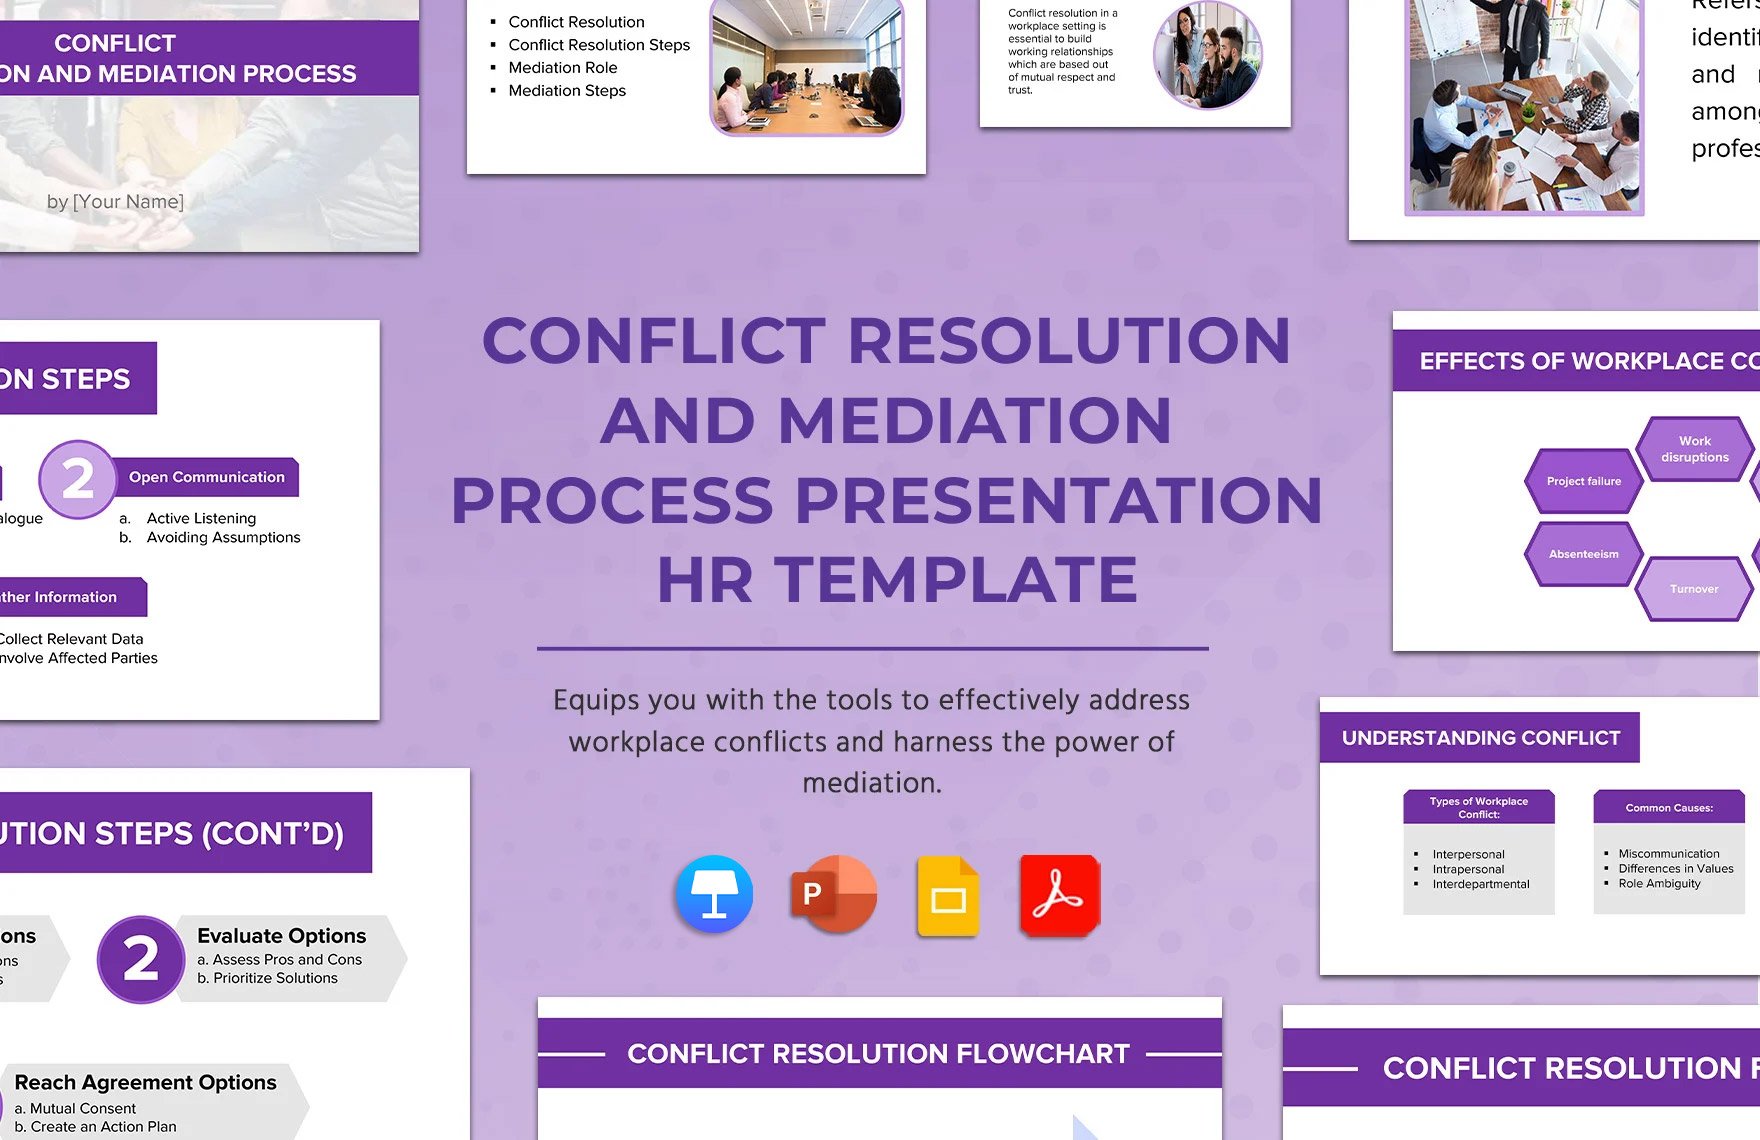 Conflict Resolution and Mediation Process Presentation HR Template